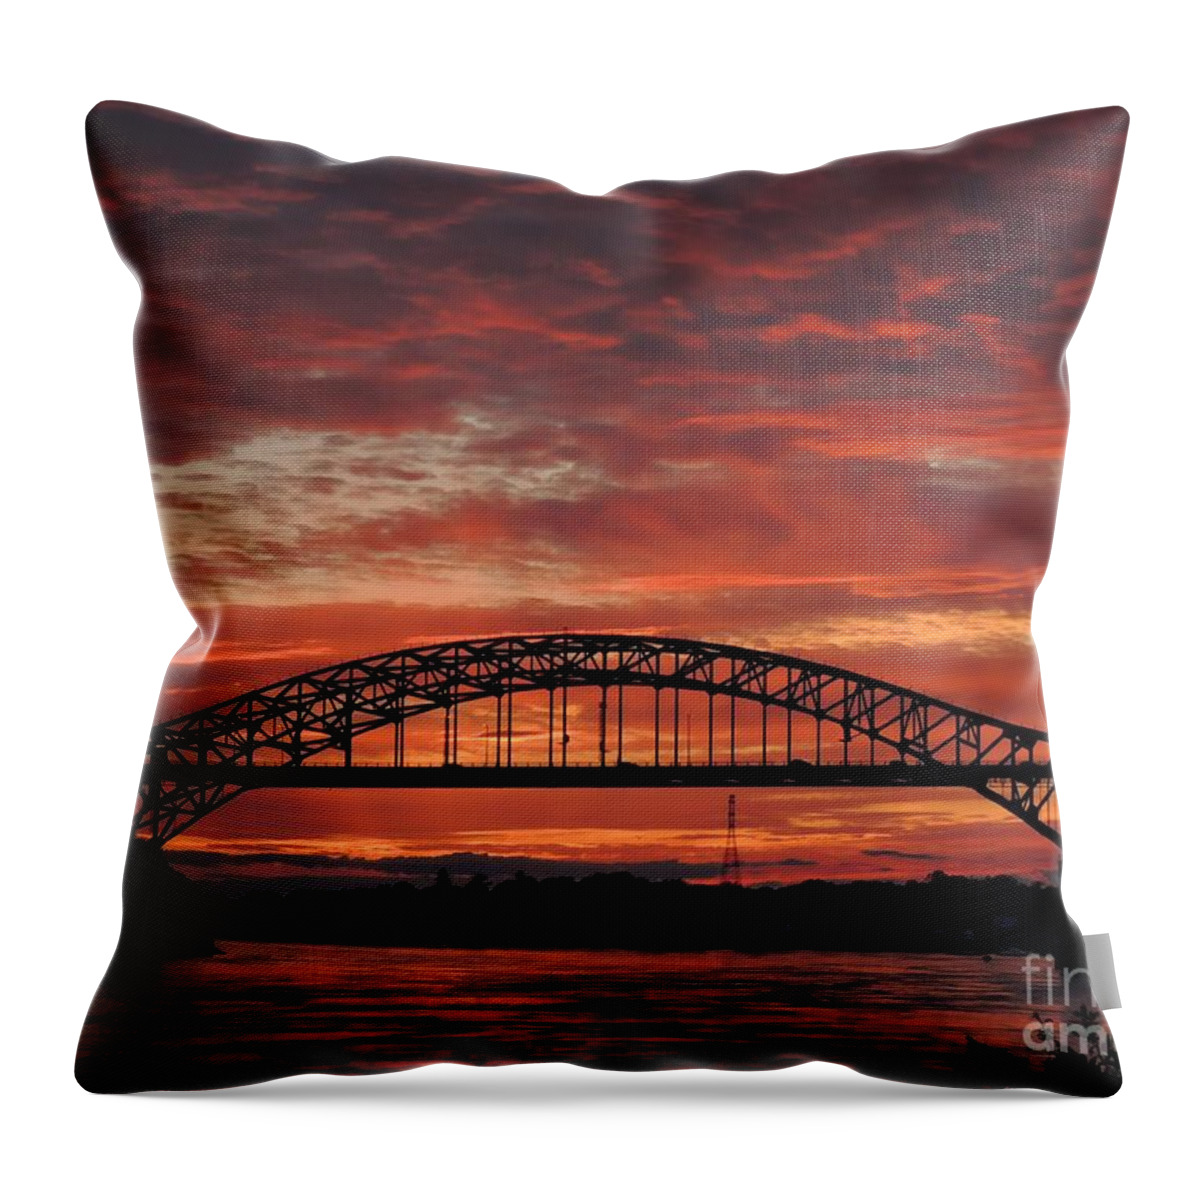 Waterscape Throw Pillow featuring the photograph Sunset On The Piscataqua     by Marcia Lee Jones